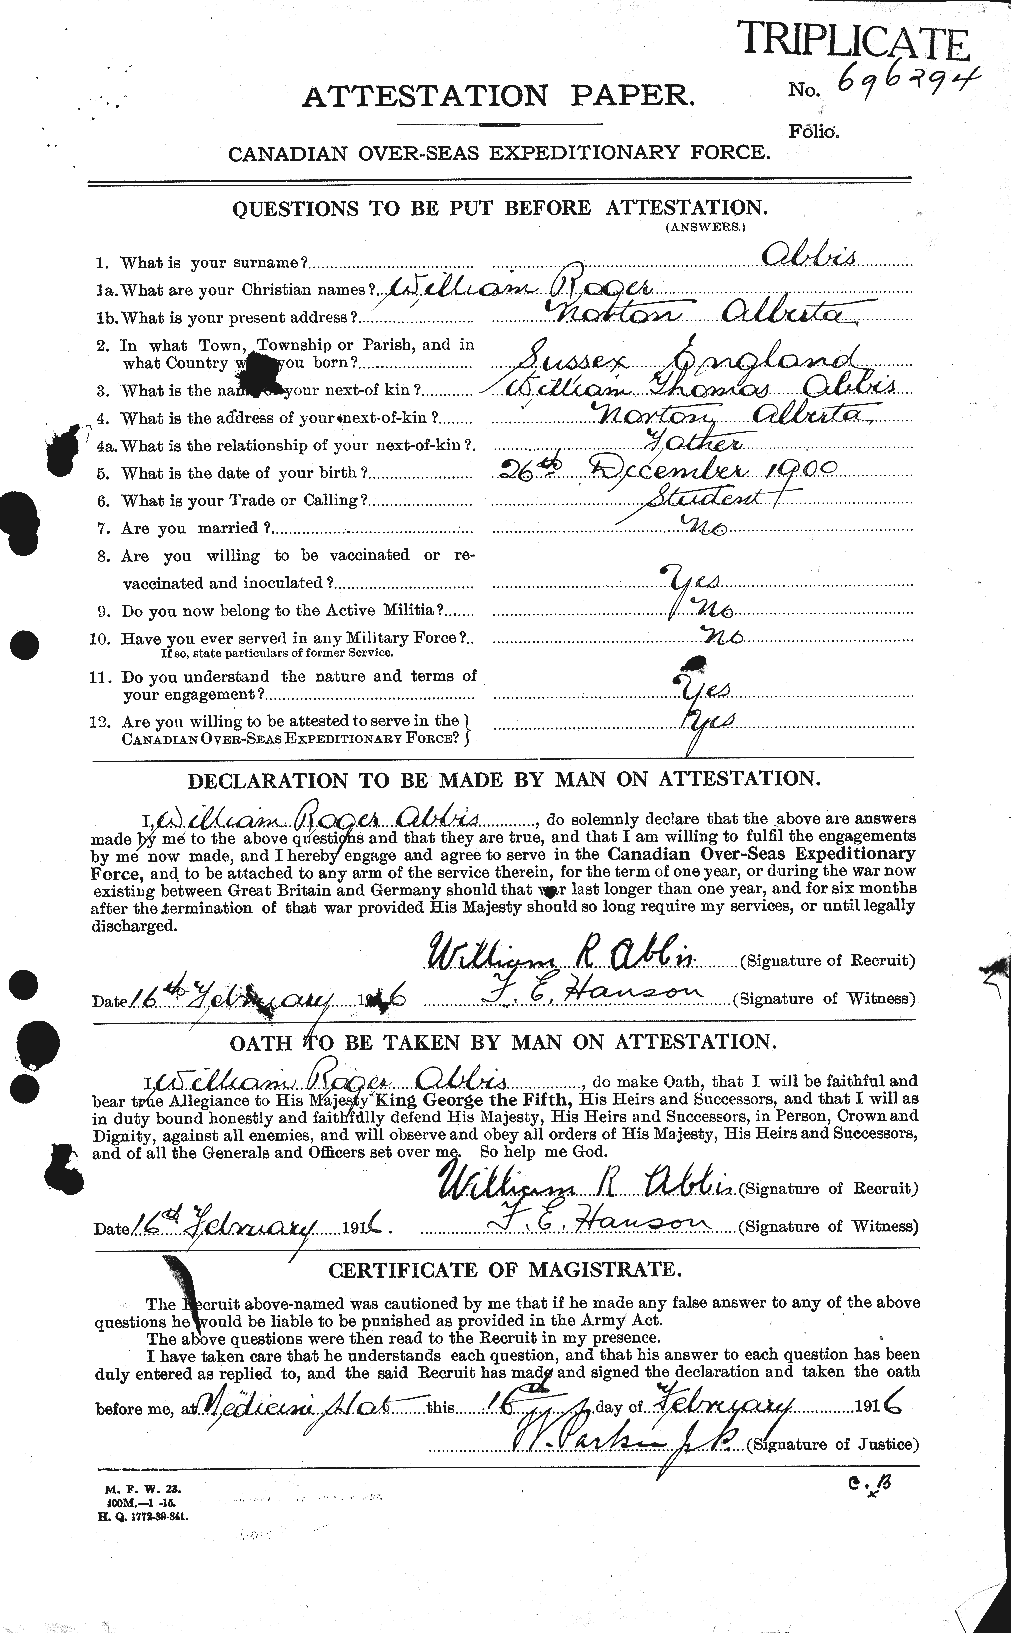 Personnel Records of the First World War - CEF 200789a